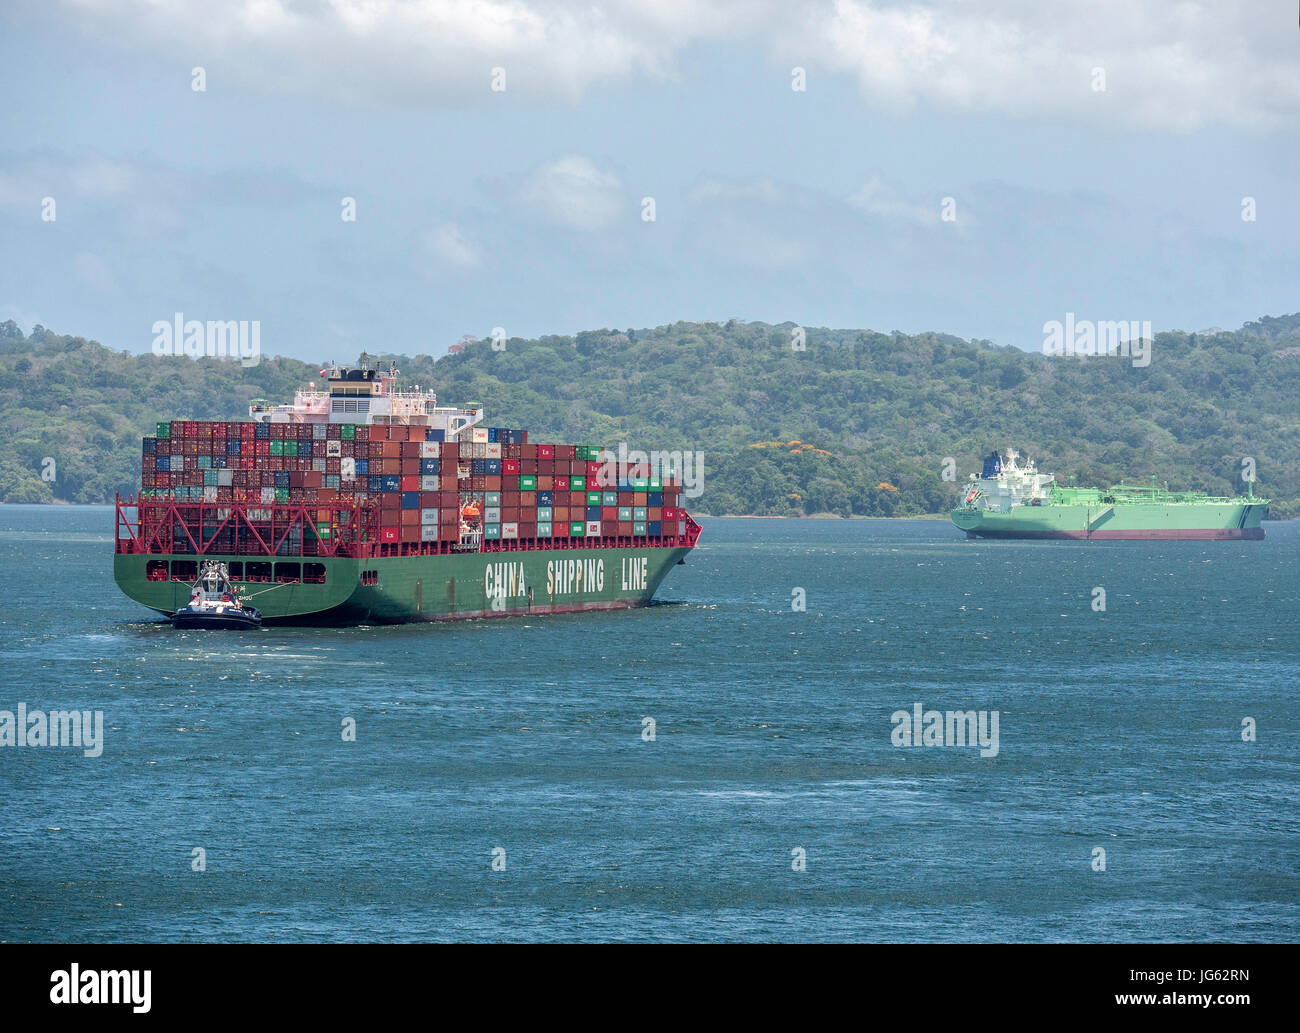 A Large Container Ship Xin Mei Zhou Of The China Shipping Line Passing Through Gatun Lake Of The Panama Canal, Steered By A Tug Boat Stock Photo